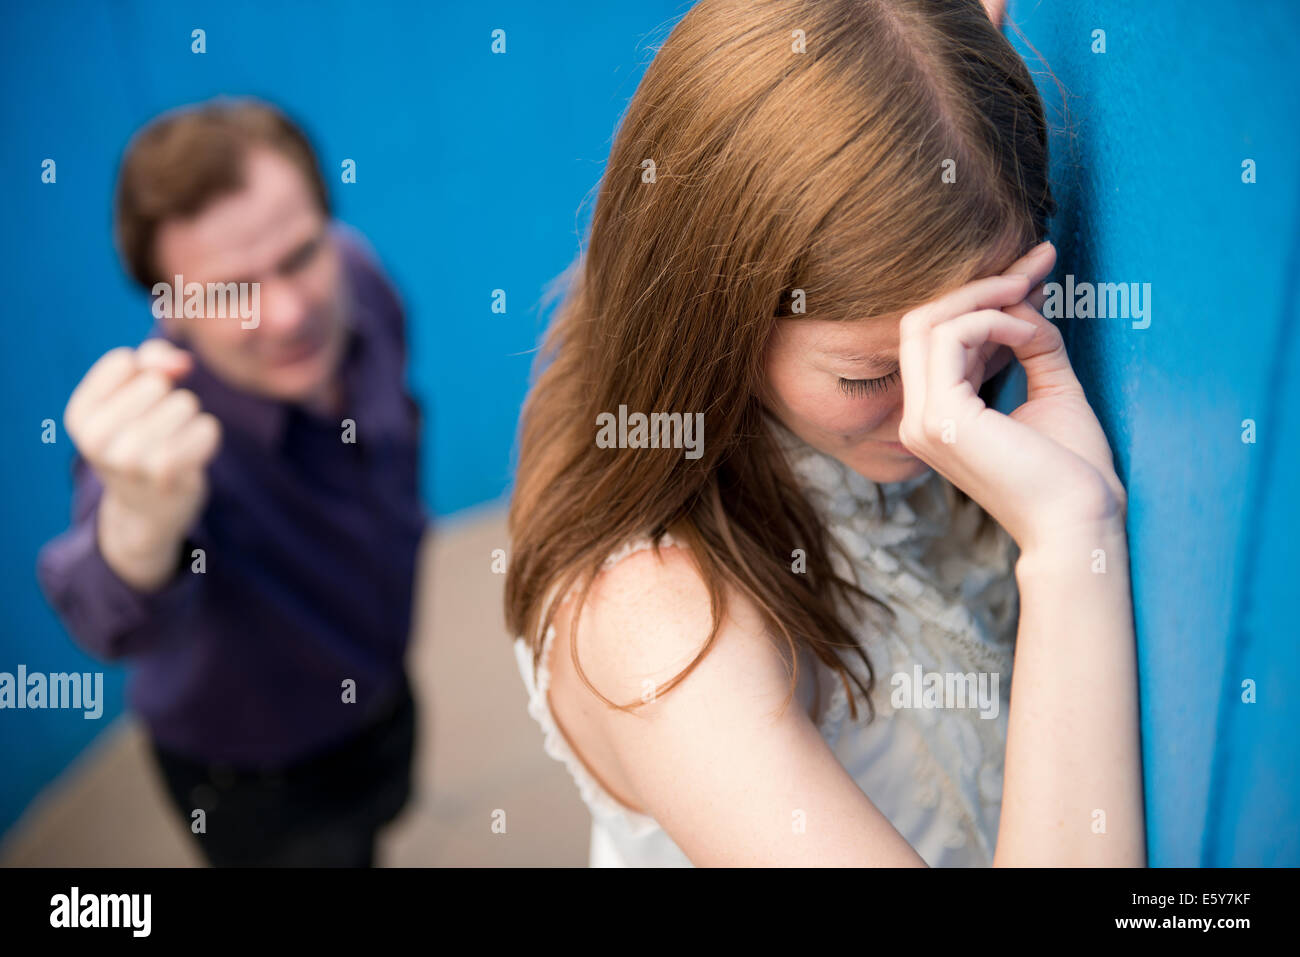 Tearful woman with her back to an aggressive man waving a clenched fist at her. Stock Photo